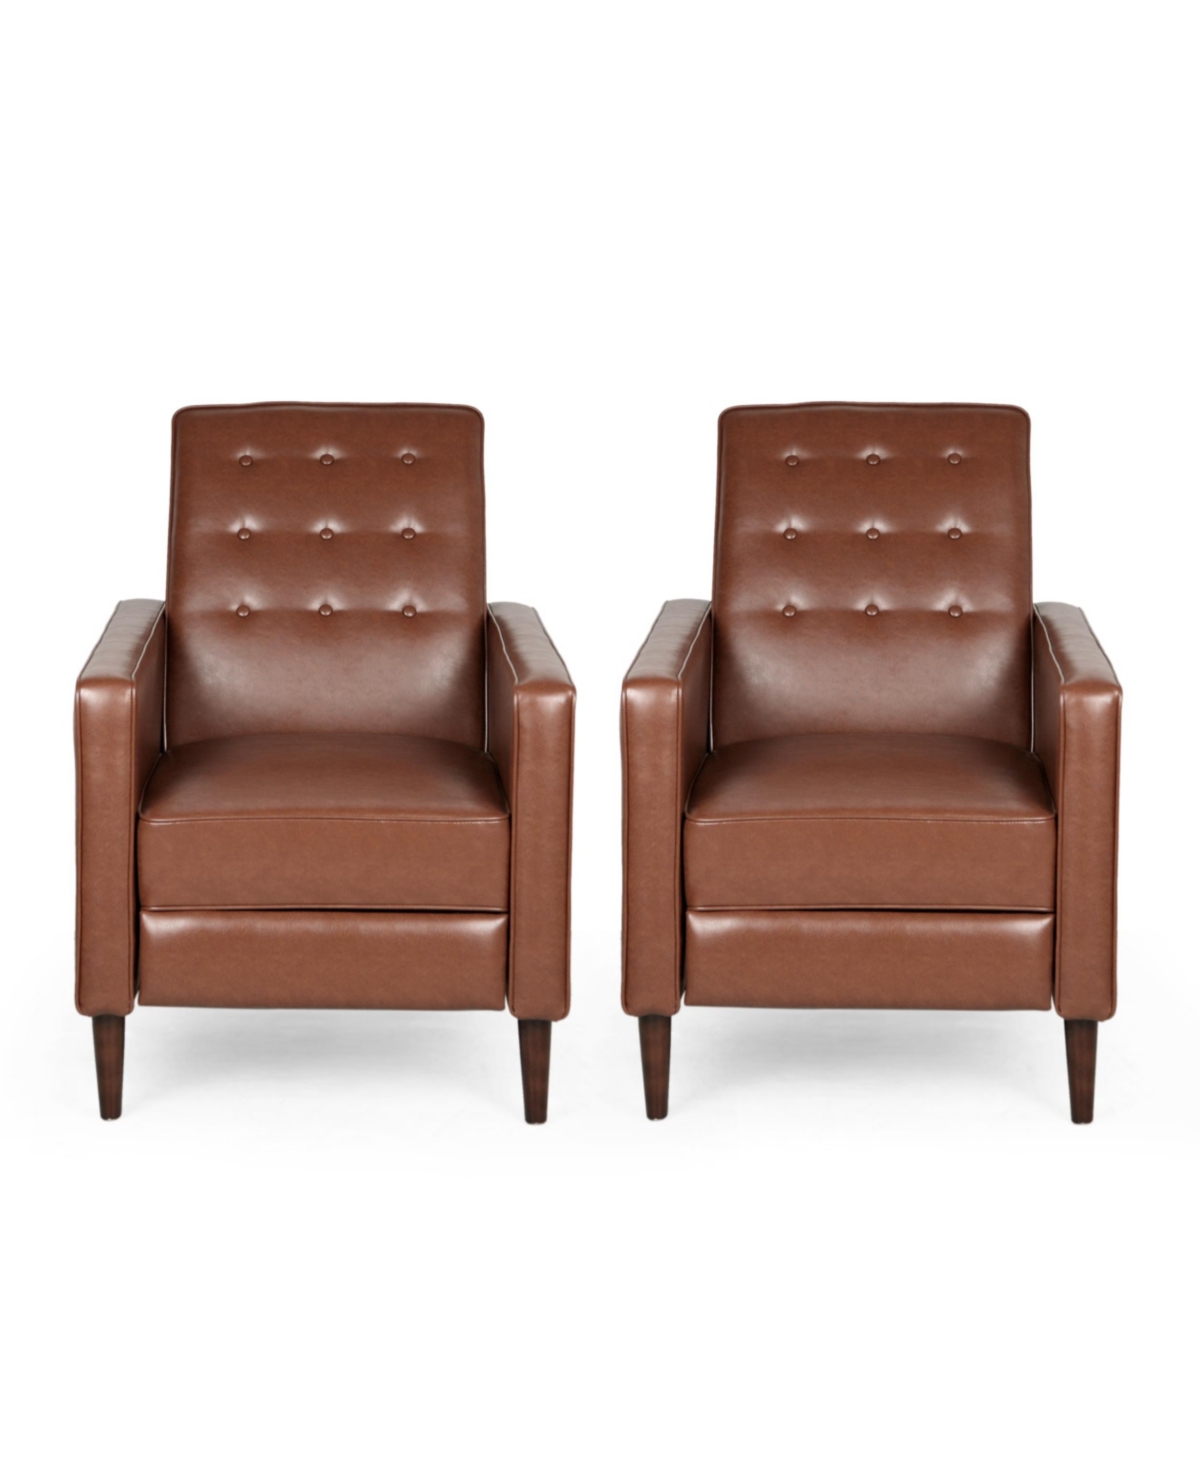 Noble House Mervynn Mid-century Modern Button Tufted Recliners Set, 2 Piece In Cognac Brown